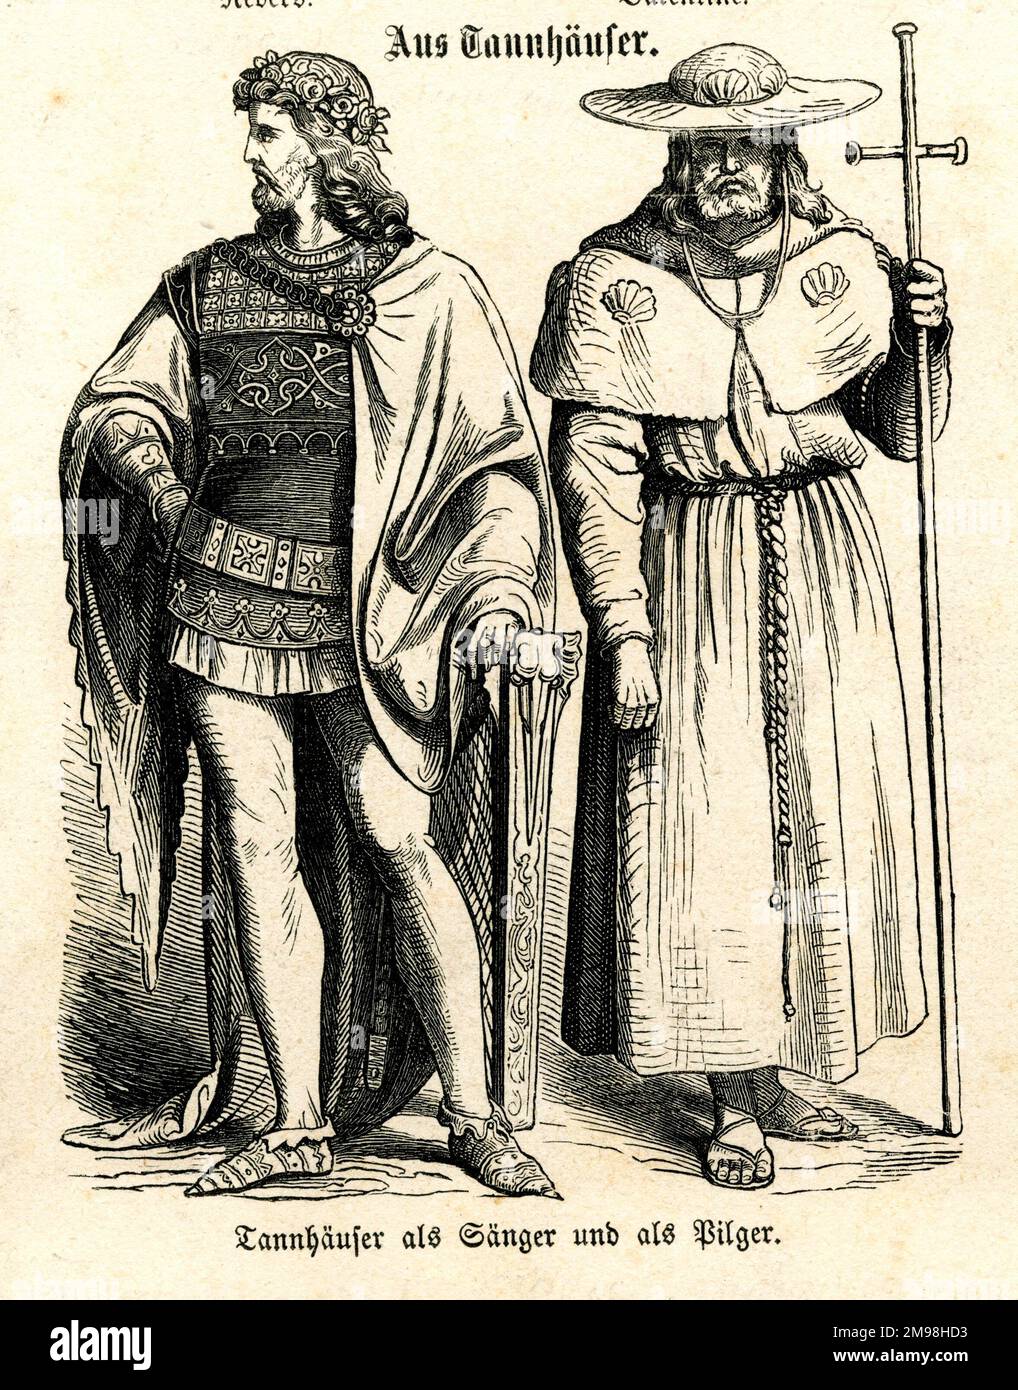 German Theatre Costume - Tannhauser als Saenger und als Pilger (Tannhauser as Singer and as Pilgrim). He was a German Minnesinger and poet, dating back to the 13th century, made even more famous by Wagner's opera. Stock Photo